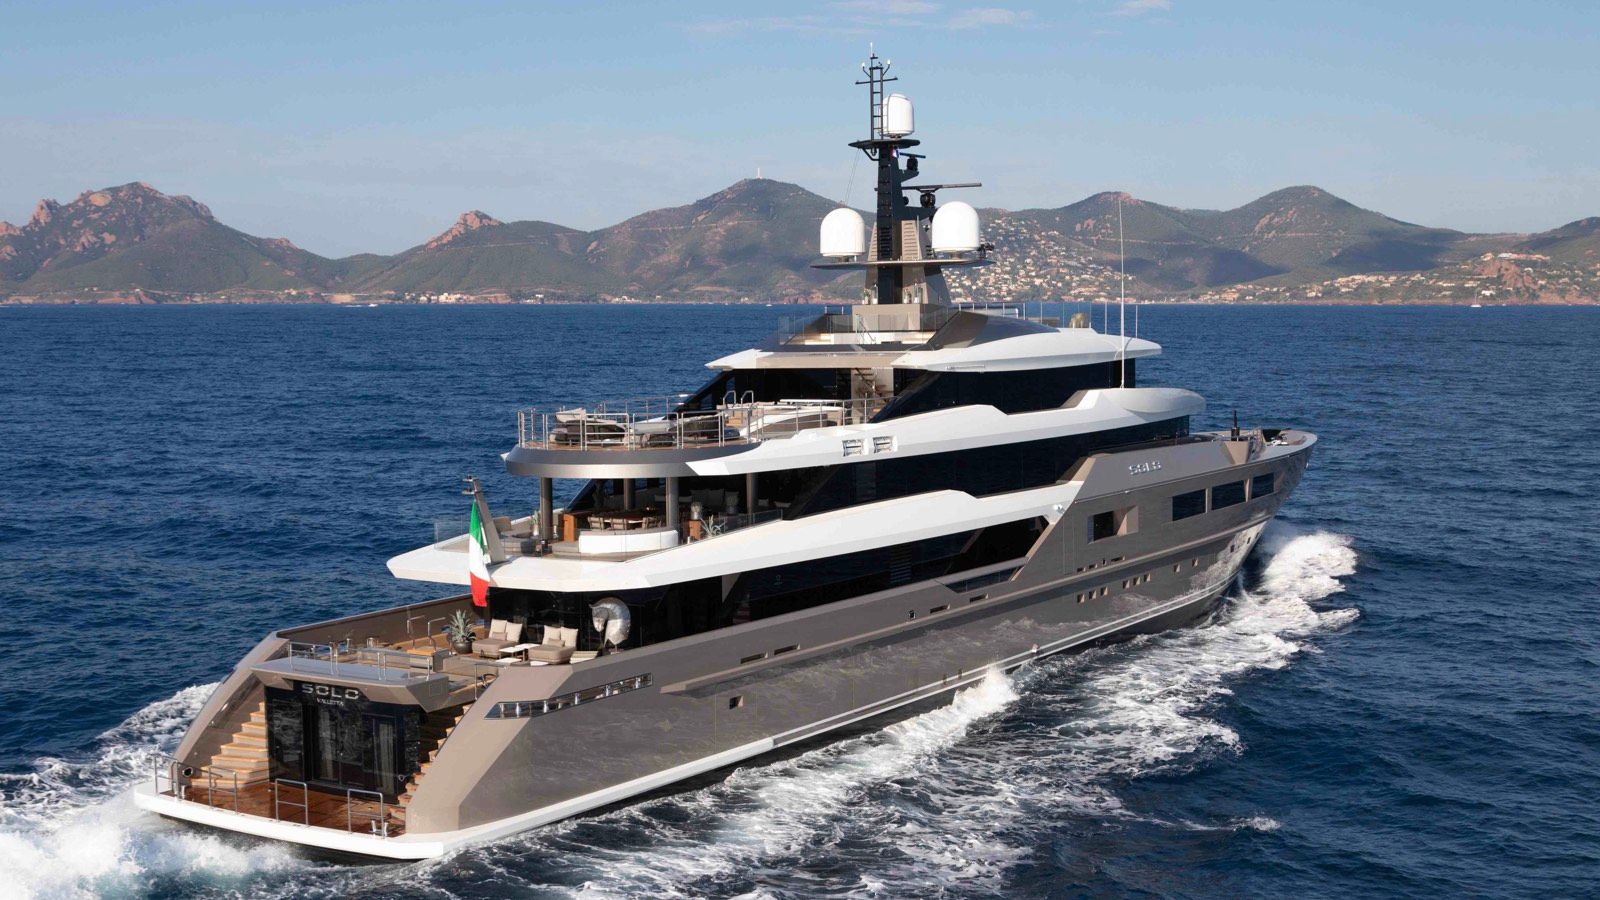 large yachts for sale